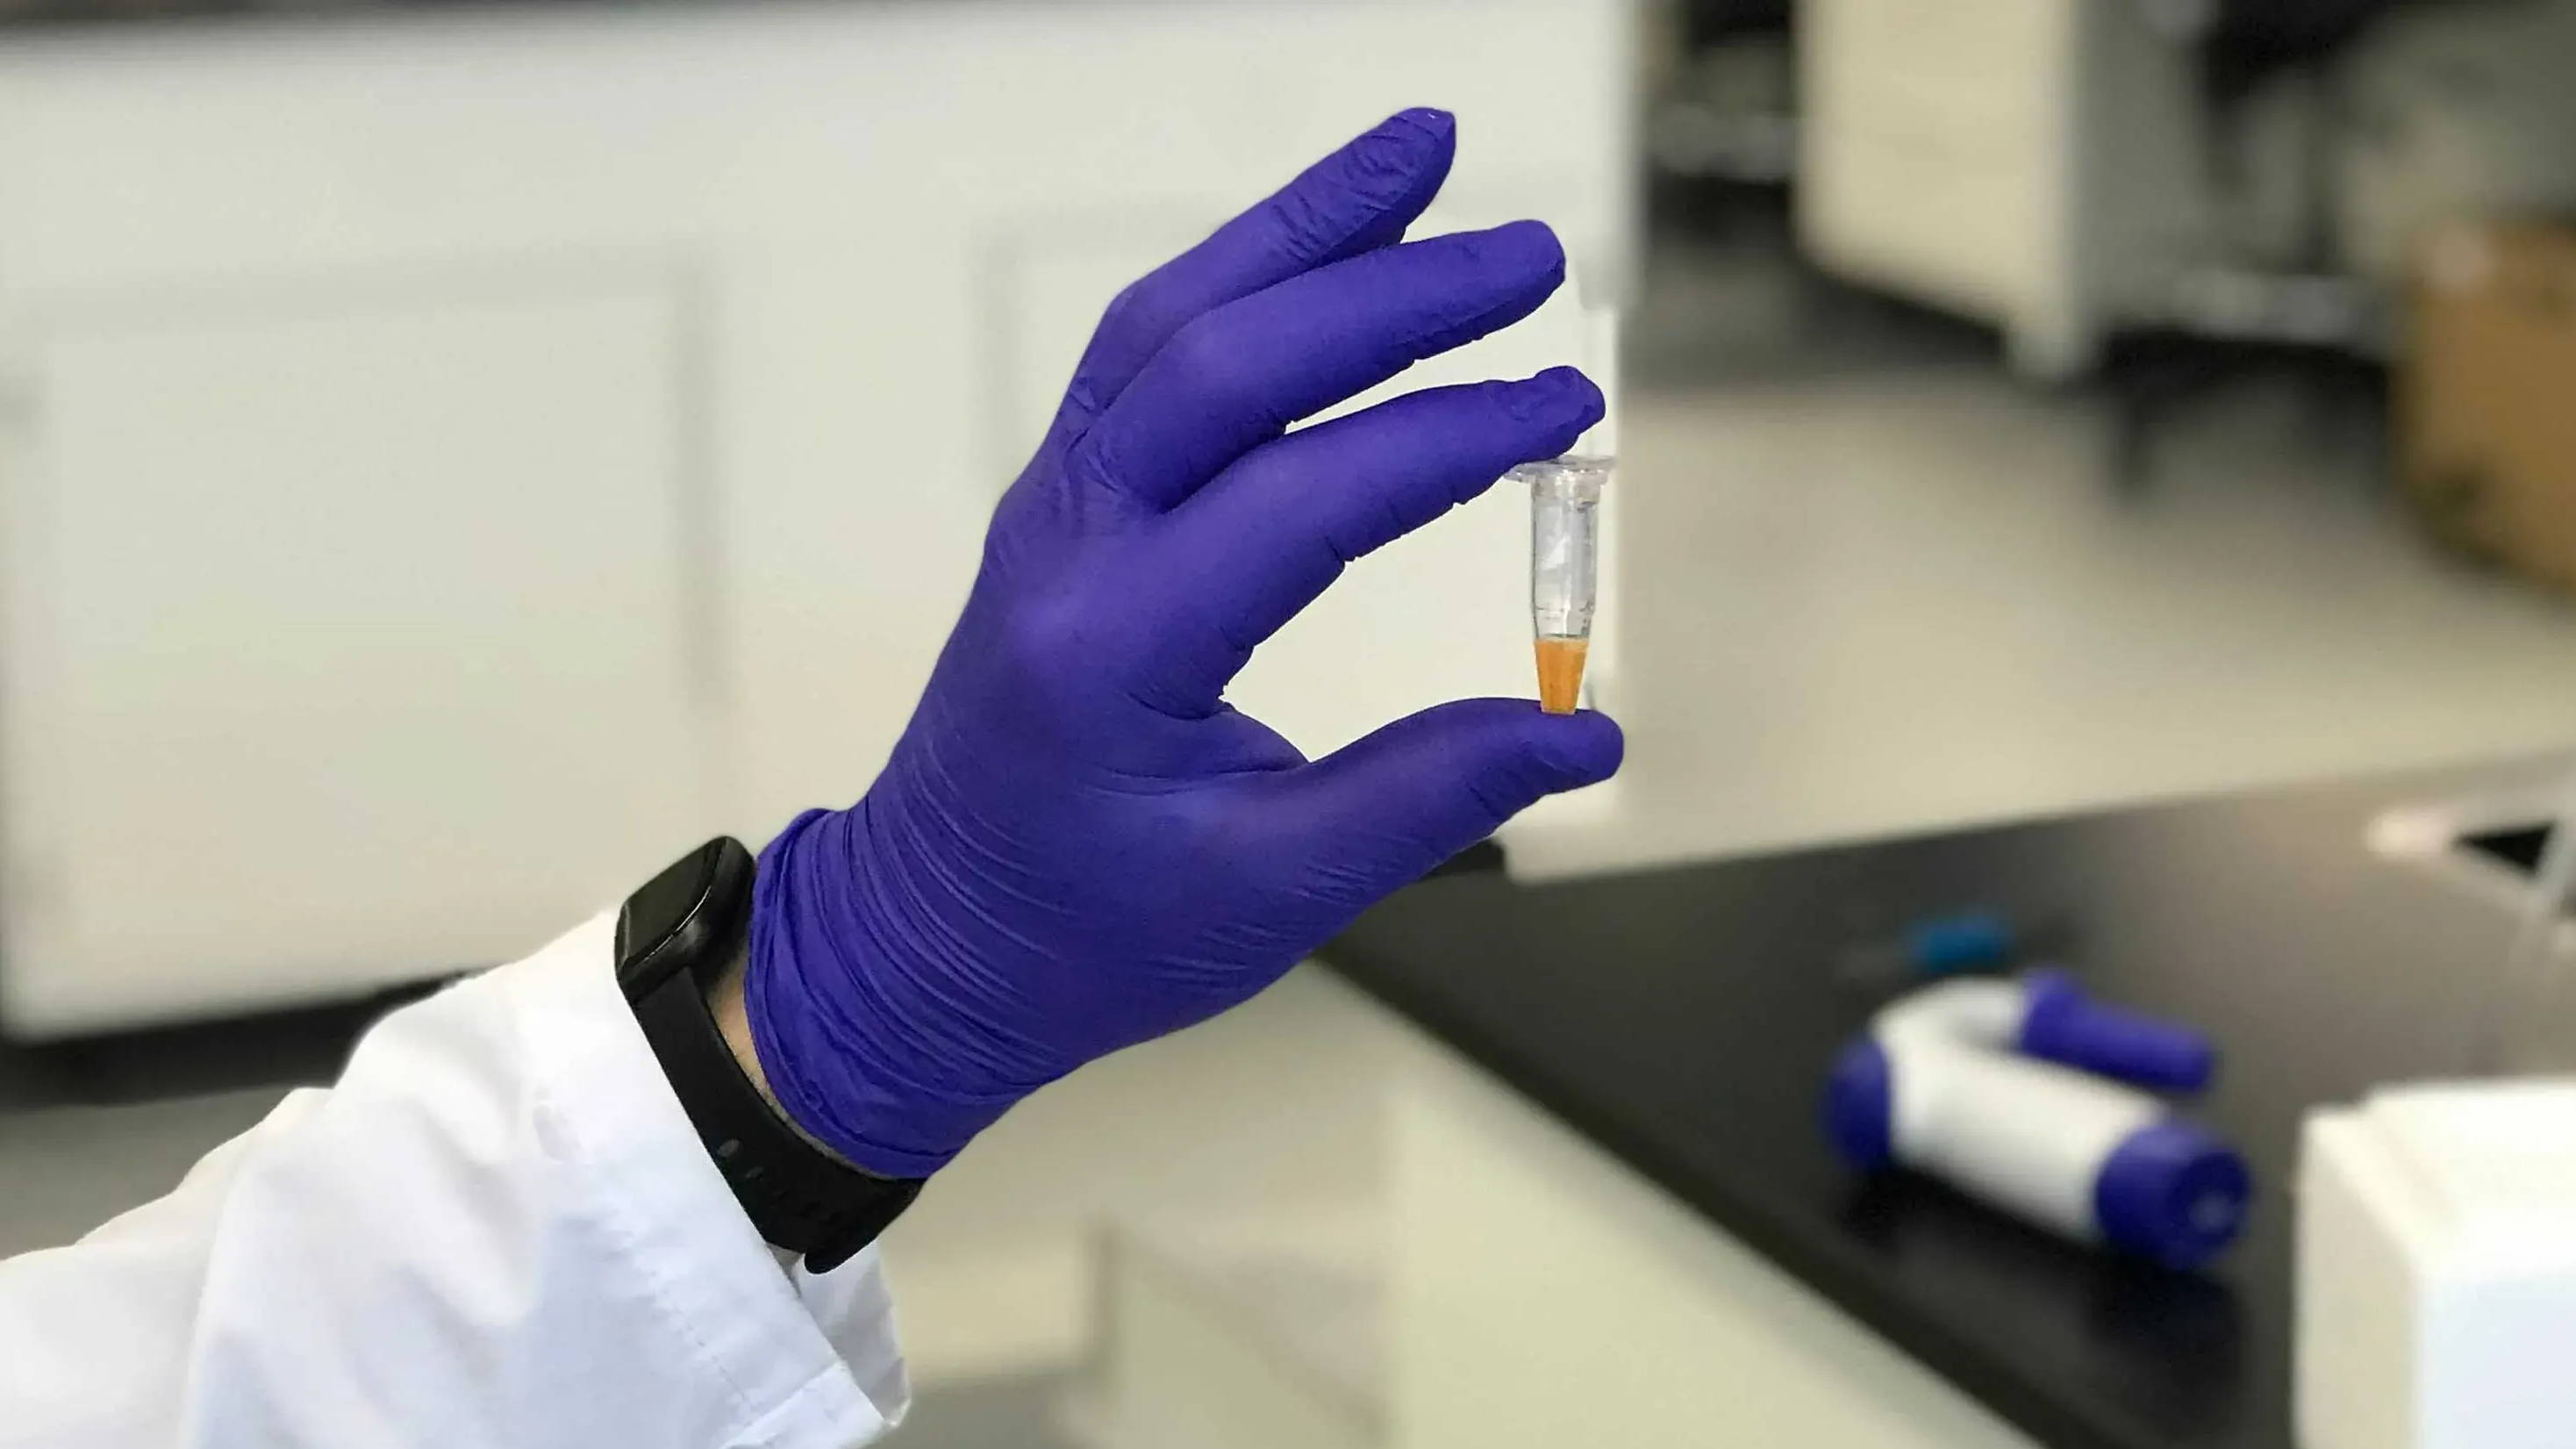 A purple gloved hand holds a small vial filled with orange liquid - a sample of the growth factor Future Fields